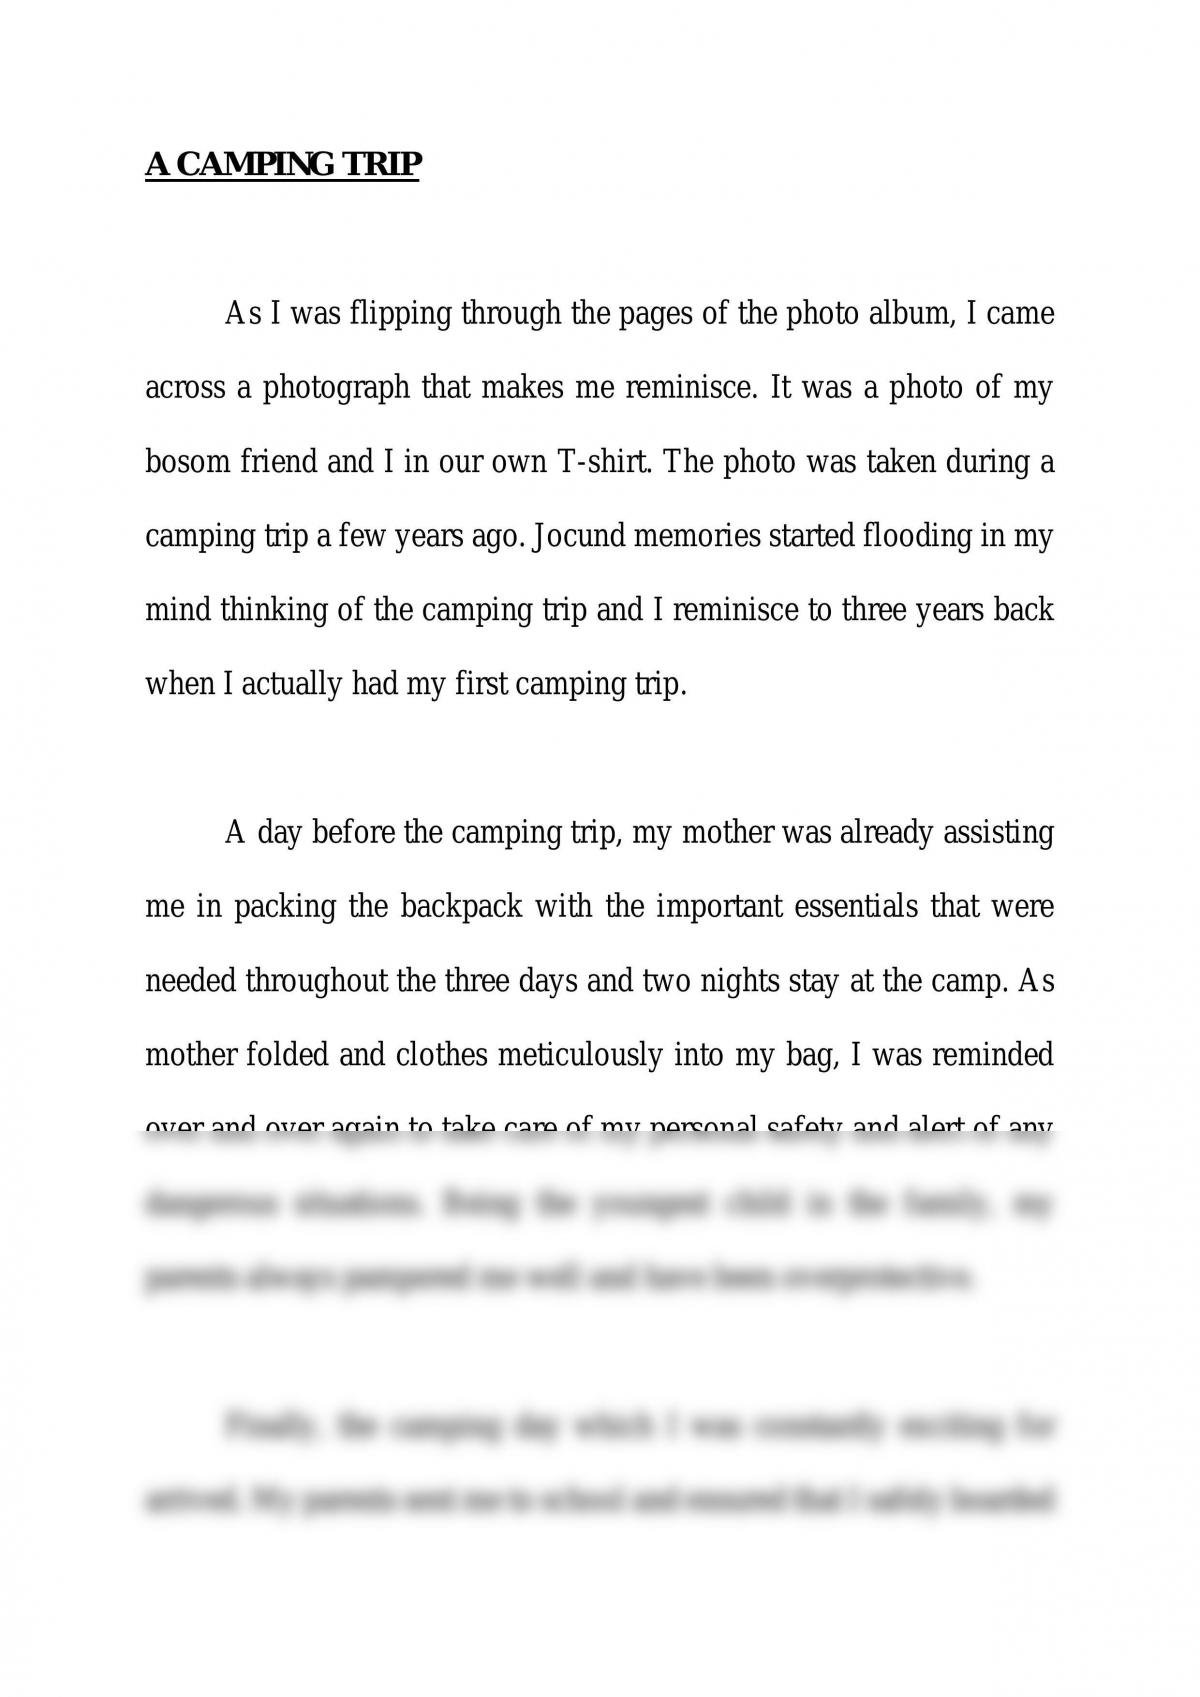 short essay about camping trip with friends